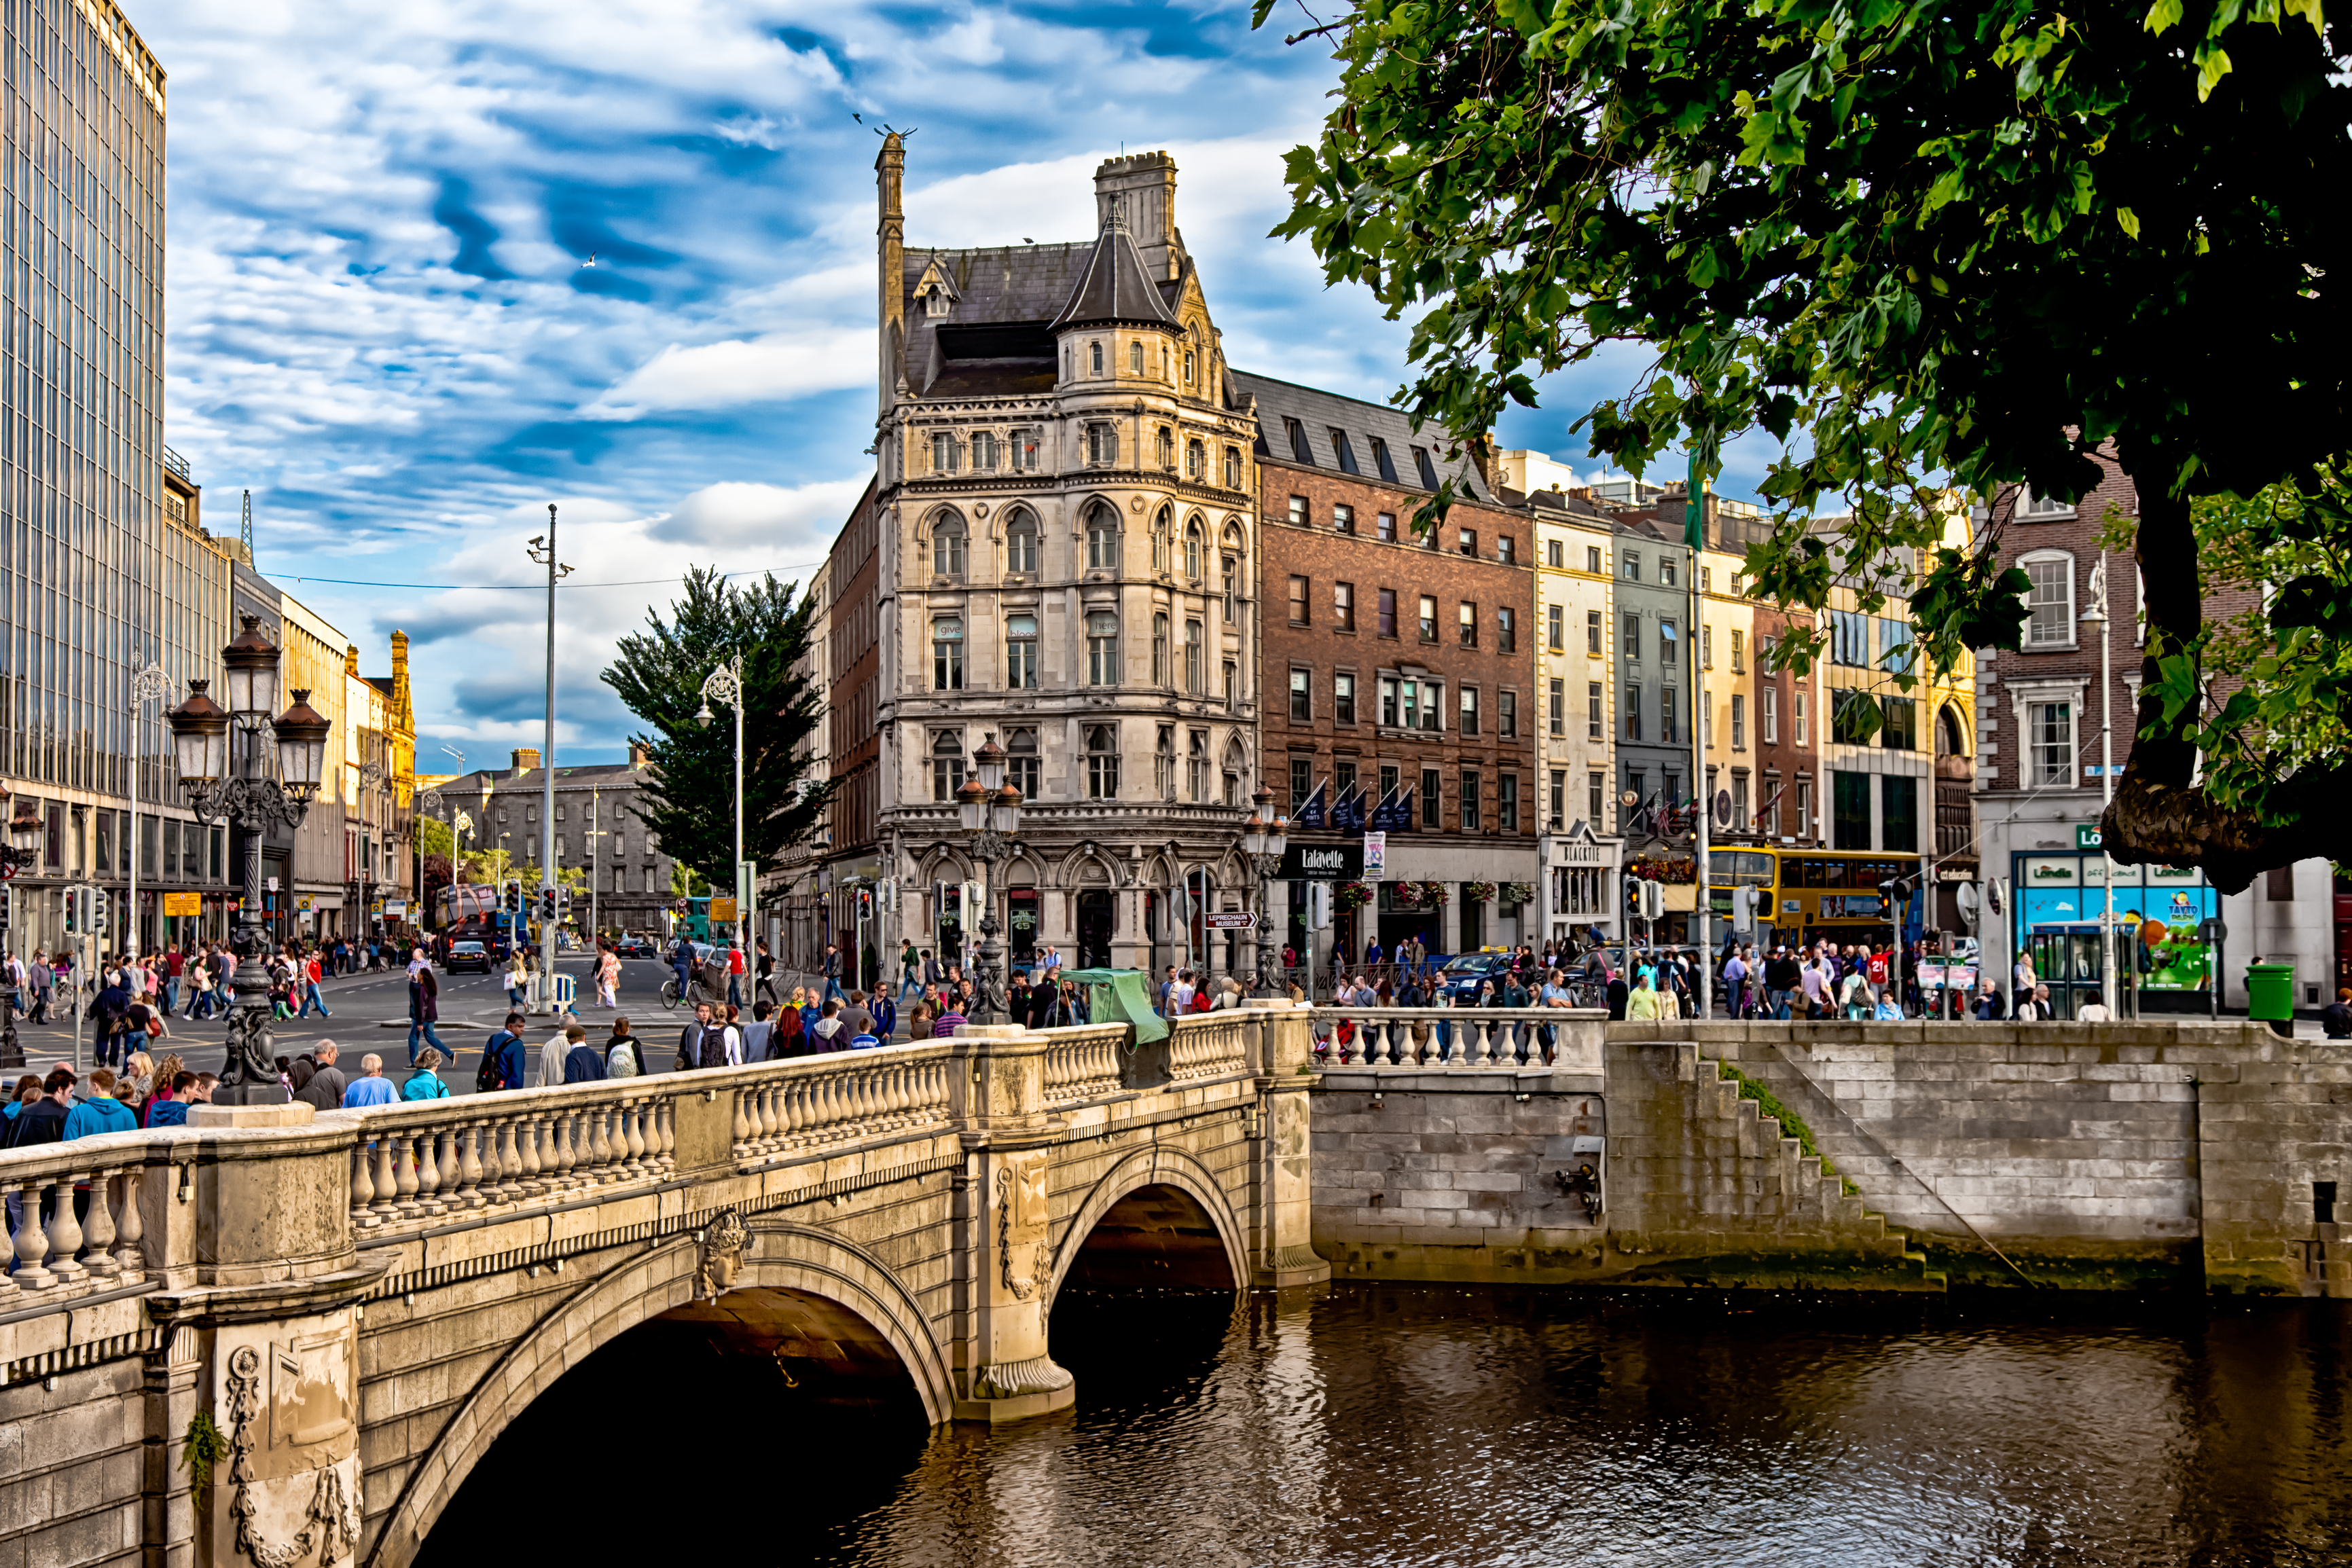 Flights to Dublin from $229 round-trip